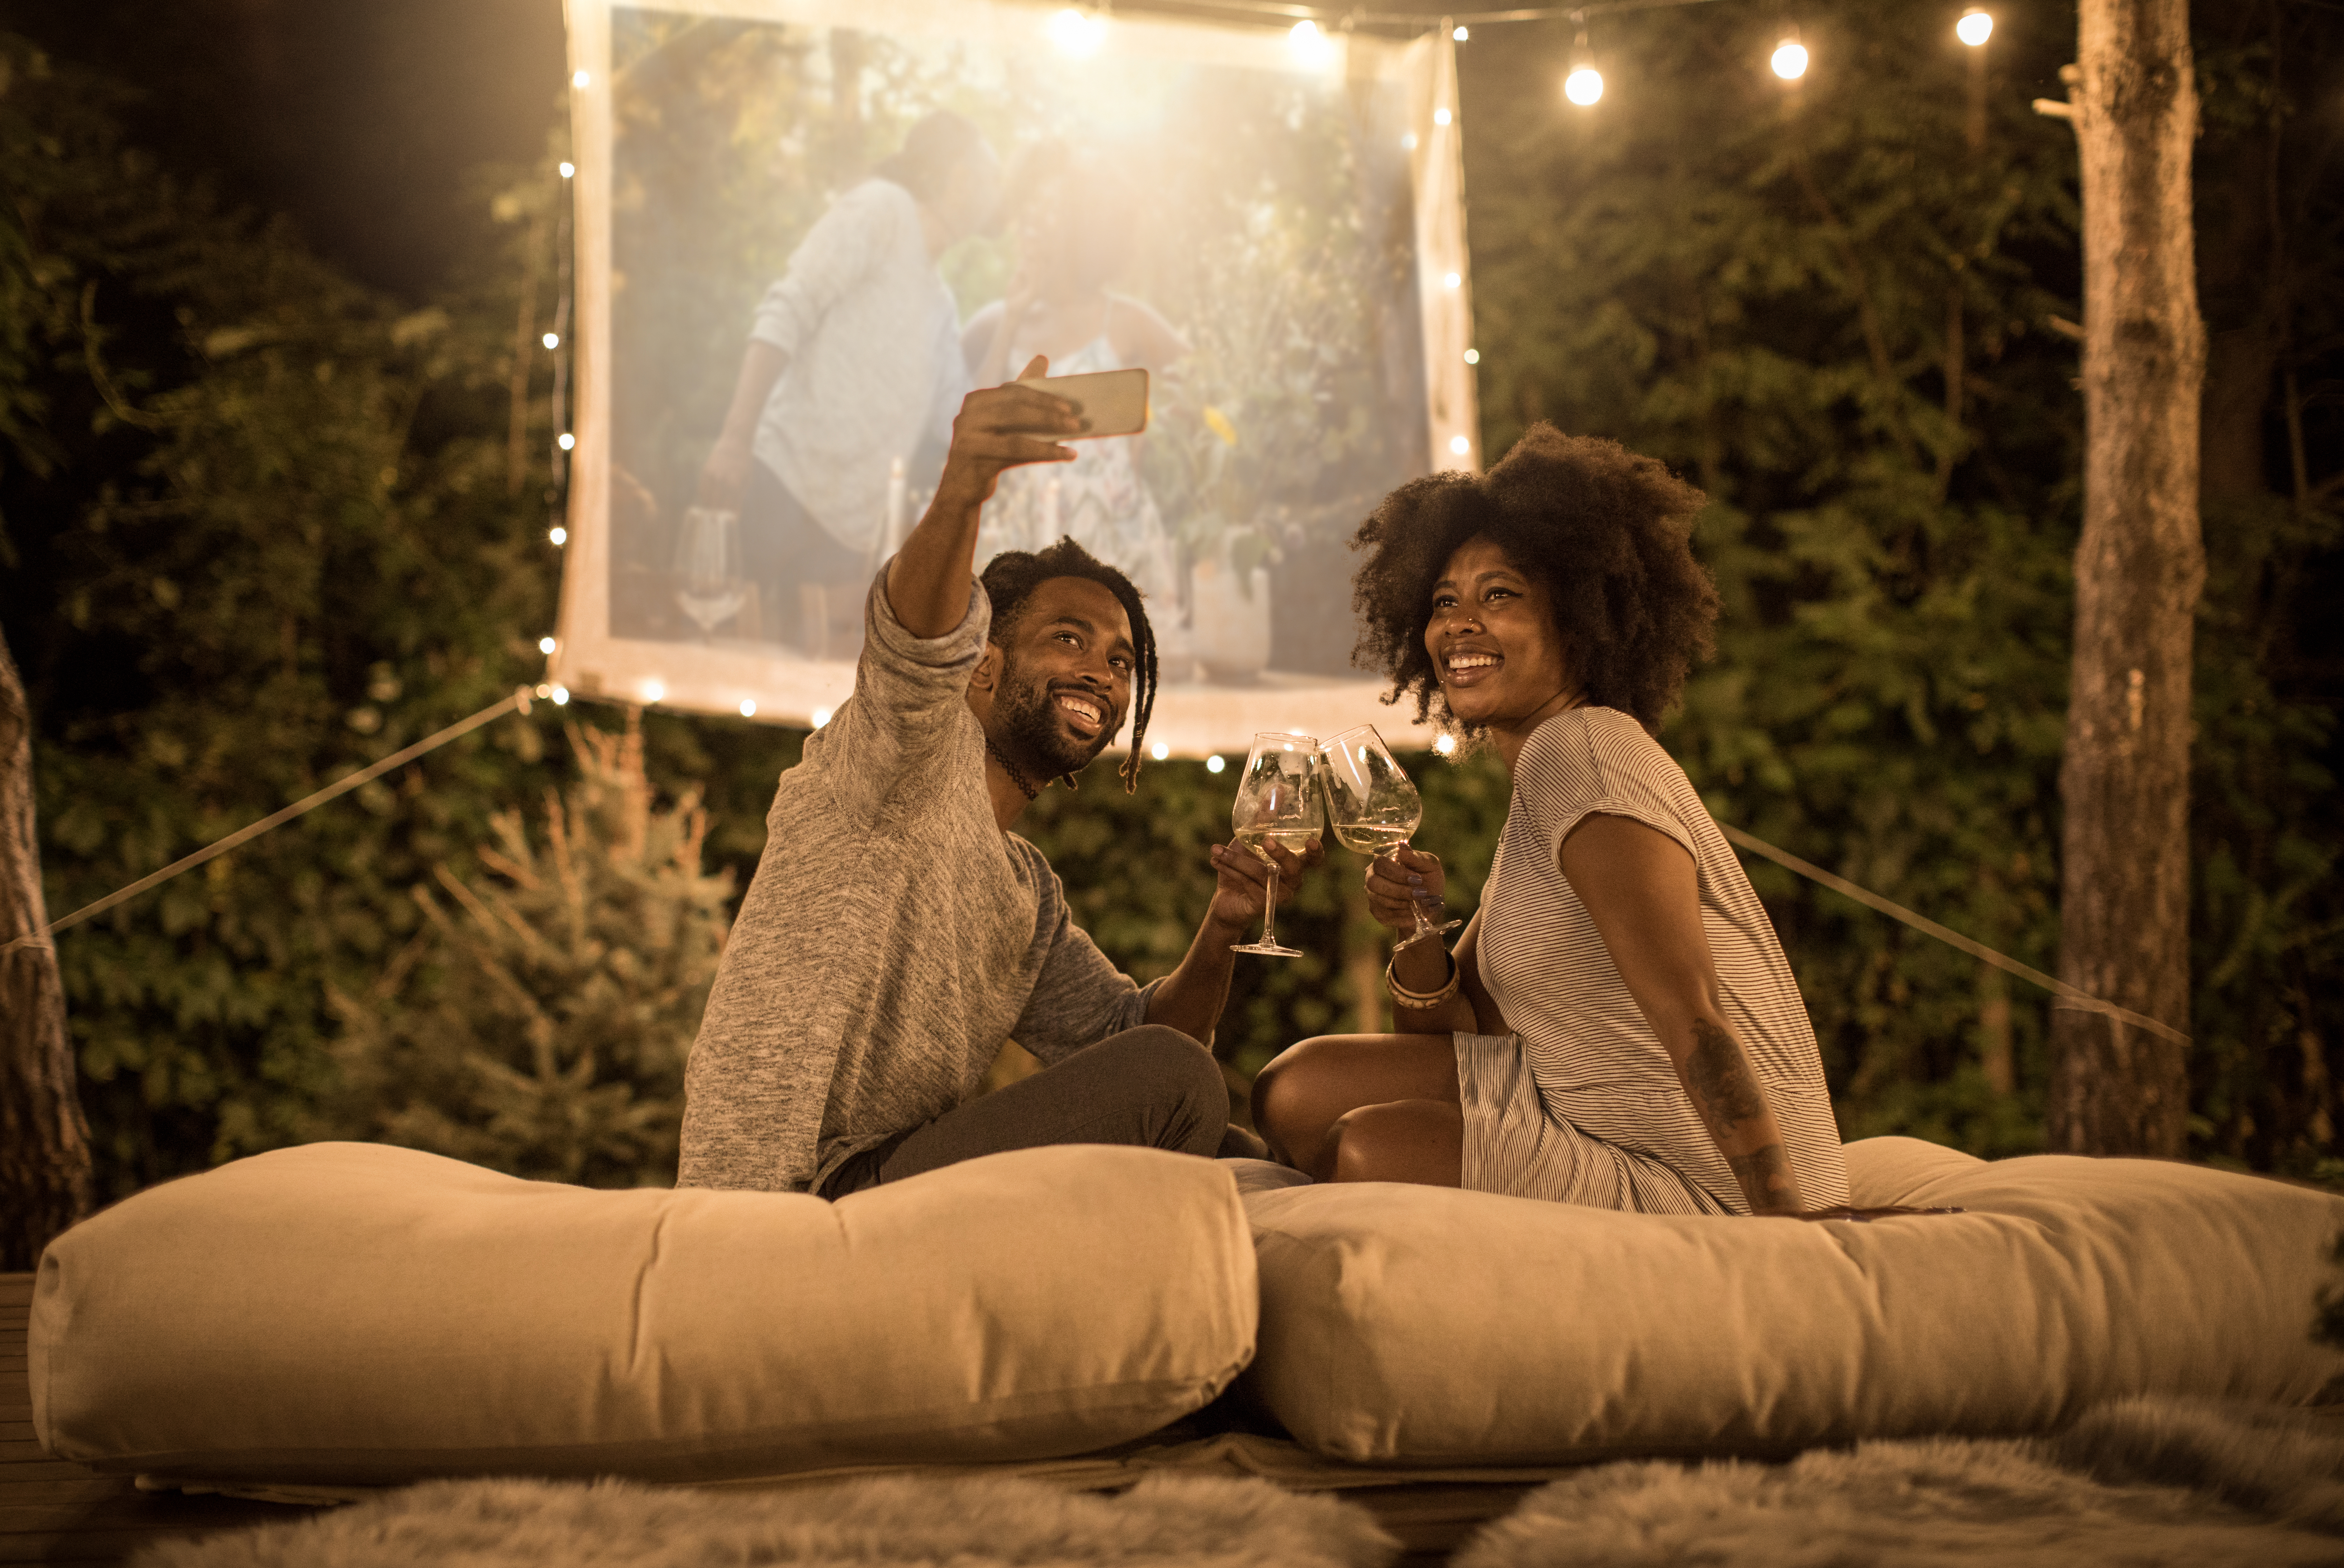 Couple enjoying outdoor movie while sipping wine